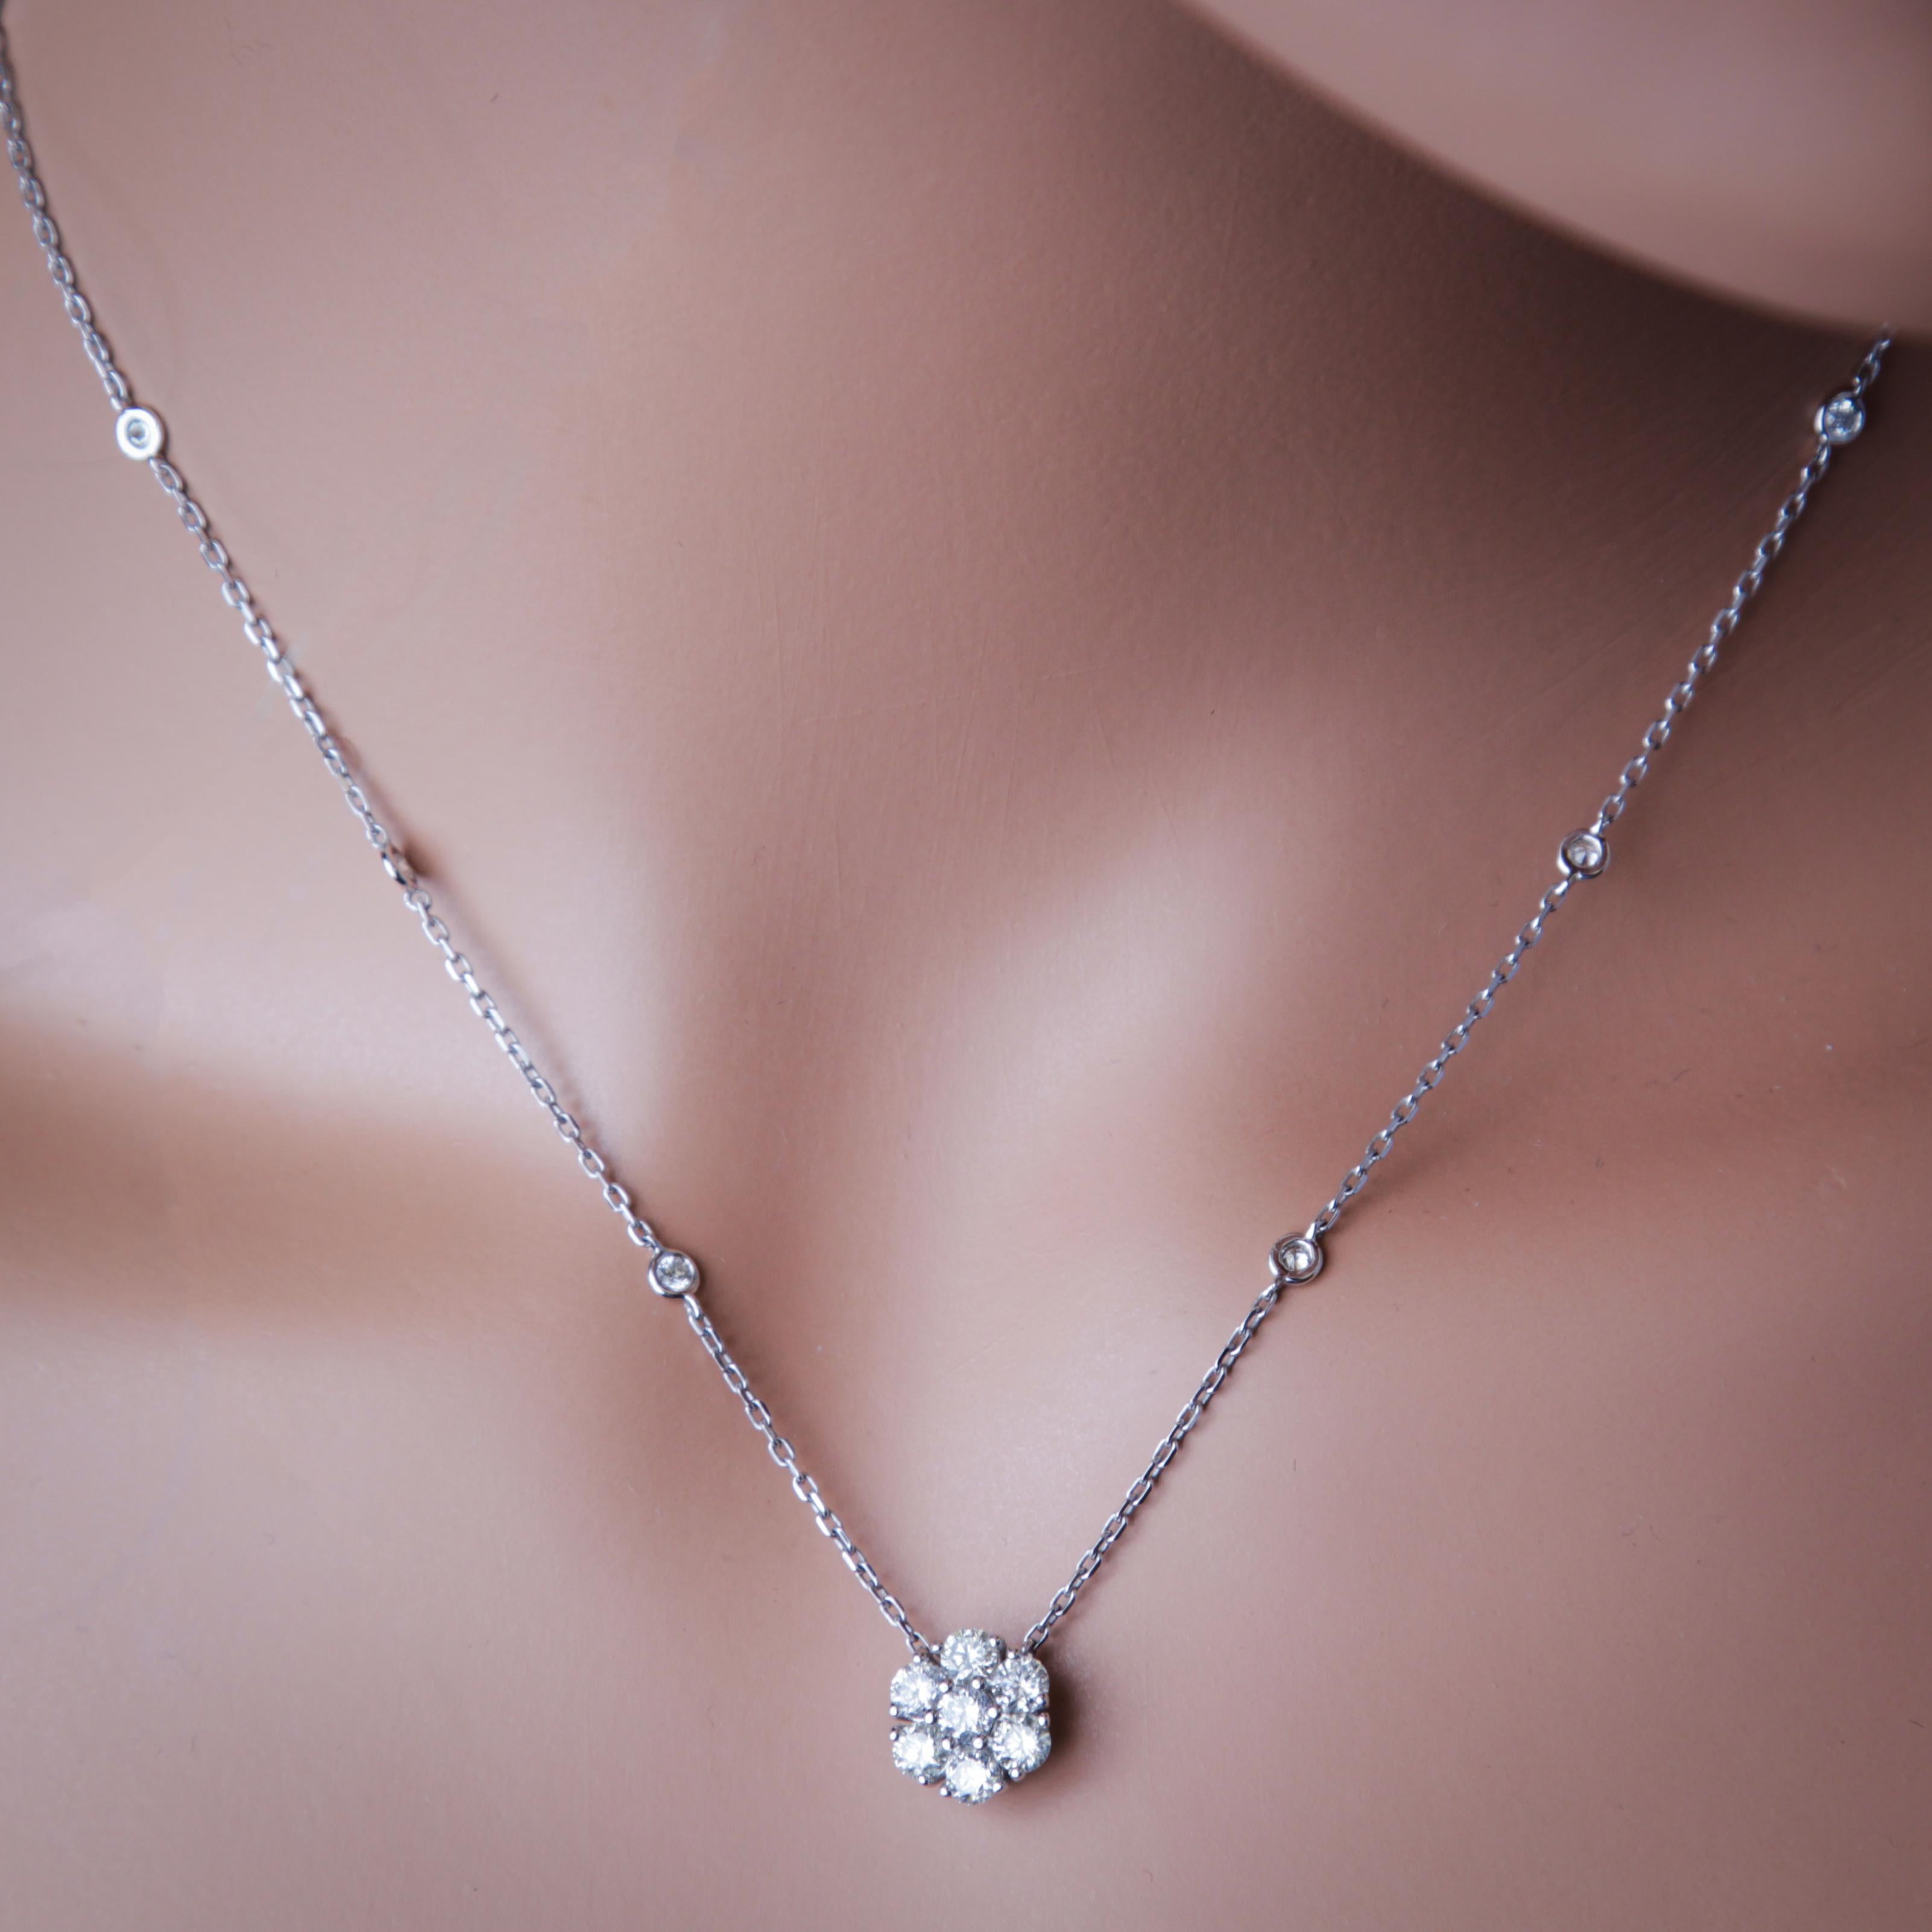 Introducing a captivating pendant in the form of a radiant flower, composed of seven round, natural diamonds. The beauty continues along the attached chain with an additional eight diamonds elegantly bezel-set. The combined weight of the diamonds